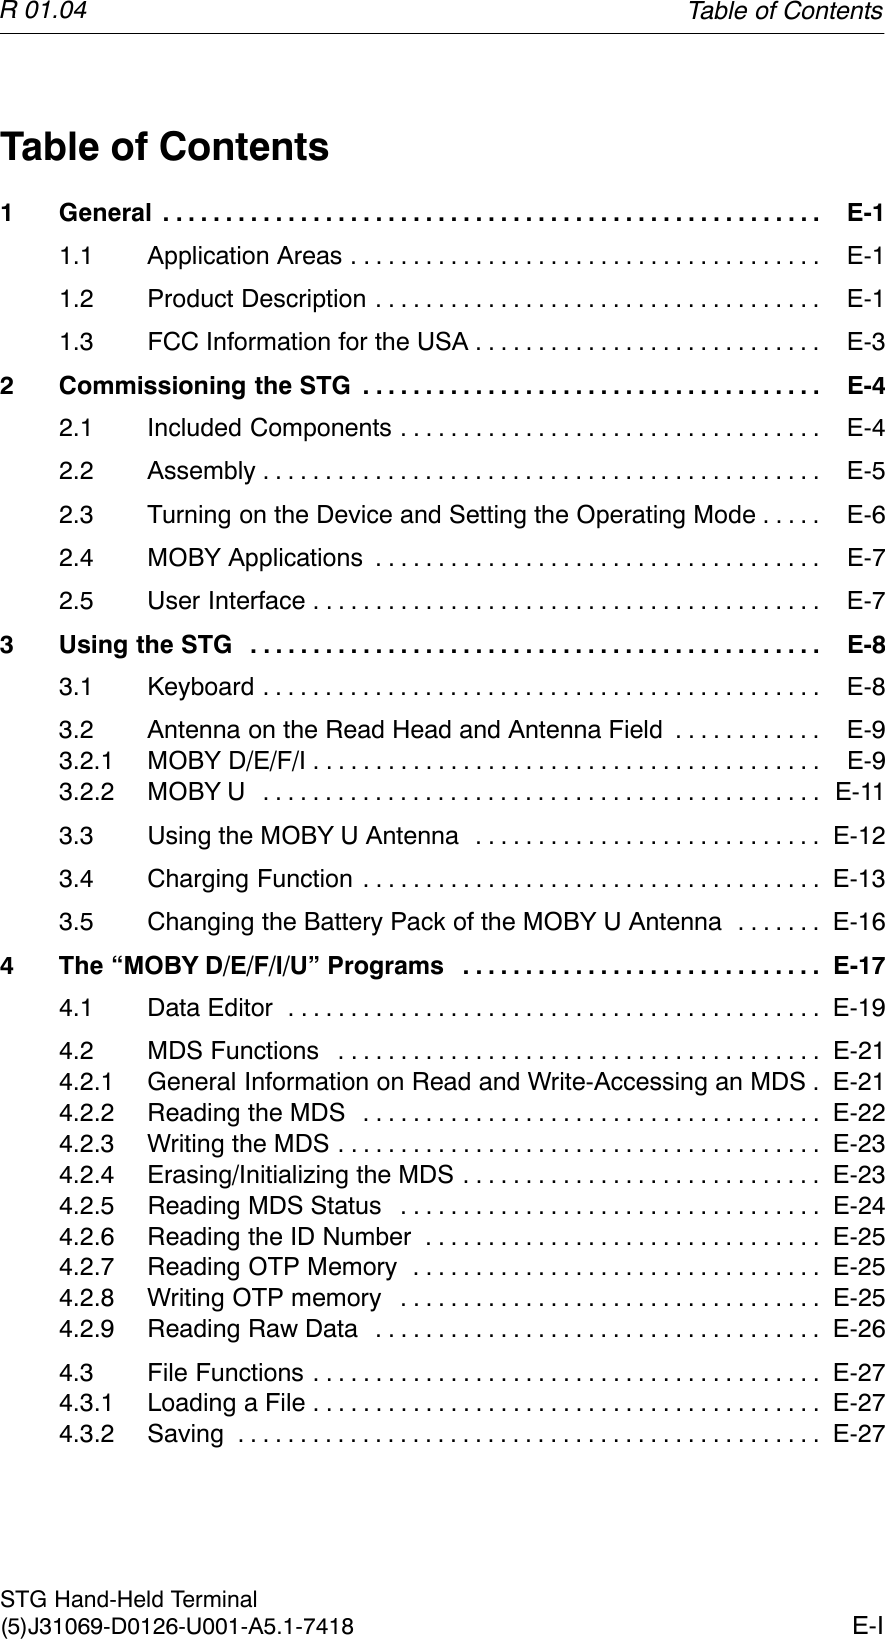 R 01.04E-ISTG Hand-Held Terminal(5)J31069-D0126-U001-A5.1-7418Table of Contents1 General E-1. . . . . . . . . . . . . . . . . . . . . . . . . . . . . . . . . . . . . . . . . . . . . . . . . . . . . 1.1 Application Areas E-1. . . . . . . . . . . . . . . . . . . . . . . . . . . . . . . . . . . . . . 1.2 Product Description E-1. . . . . . . . . . . . . . . . . . . . . . . . . . . . . . . . . . . . 1.3 FCC Information for the USA E-3. . . . . . . . . . . . . . . . . . . . . . . . . . . . 2 Commissioning the STG E-4. . . . . . . . . . . . . . . . . . . . . . . . . . . . . . . . . . . . . 2.1 Included Components E-4. . . . . . . . . . . . . . . . . . . . . . . . . . . . . . . . . . 2.2 Assembly E-5. . . . . . . . . . . . . . . . . . . . . . . . . . . . . . . . . . . . . . . . . . . . . 2.3 Turning on the Device and Setting the Operating Mode E-6. . . . . 2.4 MOBY Applications E-7. . . . . . . . . . . . . . . . . . . . . . . . . . . . . . . . . . . . 2.5 User Interface E-7. . . . . . . . . . . . . . . . . . . . . . . . . . . . . . . . . . . . . . . . . 3 Using the STG E-8. . . . . . . . . . . . . . . . . . . . . . . . . . . . . . . . . . . . . . . . . . . . . . 3.1 Keyboard E-8. . . . . . . . . . . . . . . . . . . . . . . . . . . . . . . . . . . . . . . . . . . . . 3.2 Antenna on the Read Head and Antenna Field E-9. . . . . . . . . . . . 3.2.1 MOBY D/E/F/I E-9. . . . . . . . . . . . . . . . . . . . . . . . . . . . . . . . . . . . . . . . . 3.2.2 MOBY U E-11. . . . . . . . . . . . . . . . . . . . . . . . . . . . . . . . . . . . . . . . . . . . . 3.3 Using the MOBY U Antenna E-12. . . . . . . . . . . . . . . . . . . . . . . . . . . . 3.4 Charging Function E-13. . . . . . . . . . . . . . . . . . . . . . . . . . . . . . . . . . . . . 3.5 Changing the Battery Pack of the MOBY U Antenna E-16. . . . . . . 4 The “MOBY D/E/F/I/U” Programs E-17. . . . . . . . . . . . . . . . . . . . . . . . . . . . . 4.1 Data Editor E-19. . . . . . . . . . . . . . . . . . . . . . . . . . . . . . . . . . . . . . . . . . . 4.2 MDS Functions E-21. . . . . . . . . . . . . . . . . . . . . . . . . . . . . . . . . . . . . . . 4.2.1 General Information on Read and Write-Accessing an MDS E-21. 4.2.2 Reading the MDS E-22. . . . . . . . . . . . . . . . . . . . . . . . . . . . . . . . . . . . . 4.2.3 Writing the MDS E-23. . . . . . . . . . . . . . . . . . . . . . . . . . . . . . . . . . . . . . . 4.2.4 Erasing/Initializing the MDS E-23. . . . . . . . . . . . . . . . . . . . . . . . . . . . . 4.2.5 Reading MDS Status E-24. . . . . . . . . . . . . . . . . . . . . . . . . . . . . . . . . . 4.2.6 Reading the ID Number E-25. . . . . . . . . . . . . . . . . . . . . . . . . . . . . . . . 4.2.7 Reading OTP Memory E-25. . . . . . . . . . . . . . . . . . . . . . . . . . . . . . . . . 4.2.8 Writing OTP memory E-25. . . . . . . . . . . . . . . . . . . . . . . . . . . . . . . . . . 4.2.9 Reading Raw Data E-26. . . . . . . . . . . . . . . . . . . . . . . . . . . . . . . . . . . . 4.3 File Functions E-27. . . . . . . . . . . . . . . . . . . . . . . . . . . . . . . . . . . . . . . . . 4.3.1 Loading a File E-27. . . . . . . . . . . . . . . . . . . . . . . . . . . . . . . . . . . . . . . . . 4.3.2 Saving E-27. . . . . . . . . . . . . . . . . . . . . . . . . . . . . . . . . . . . . . . . . . . . . . . Table of Contents